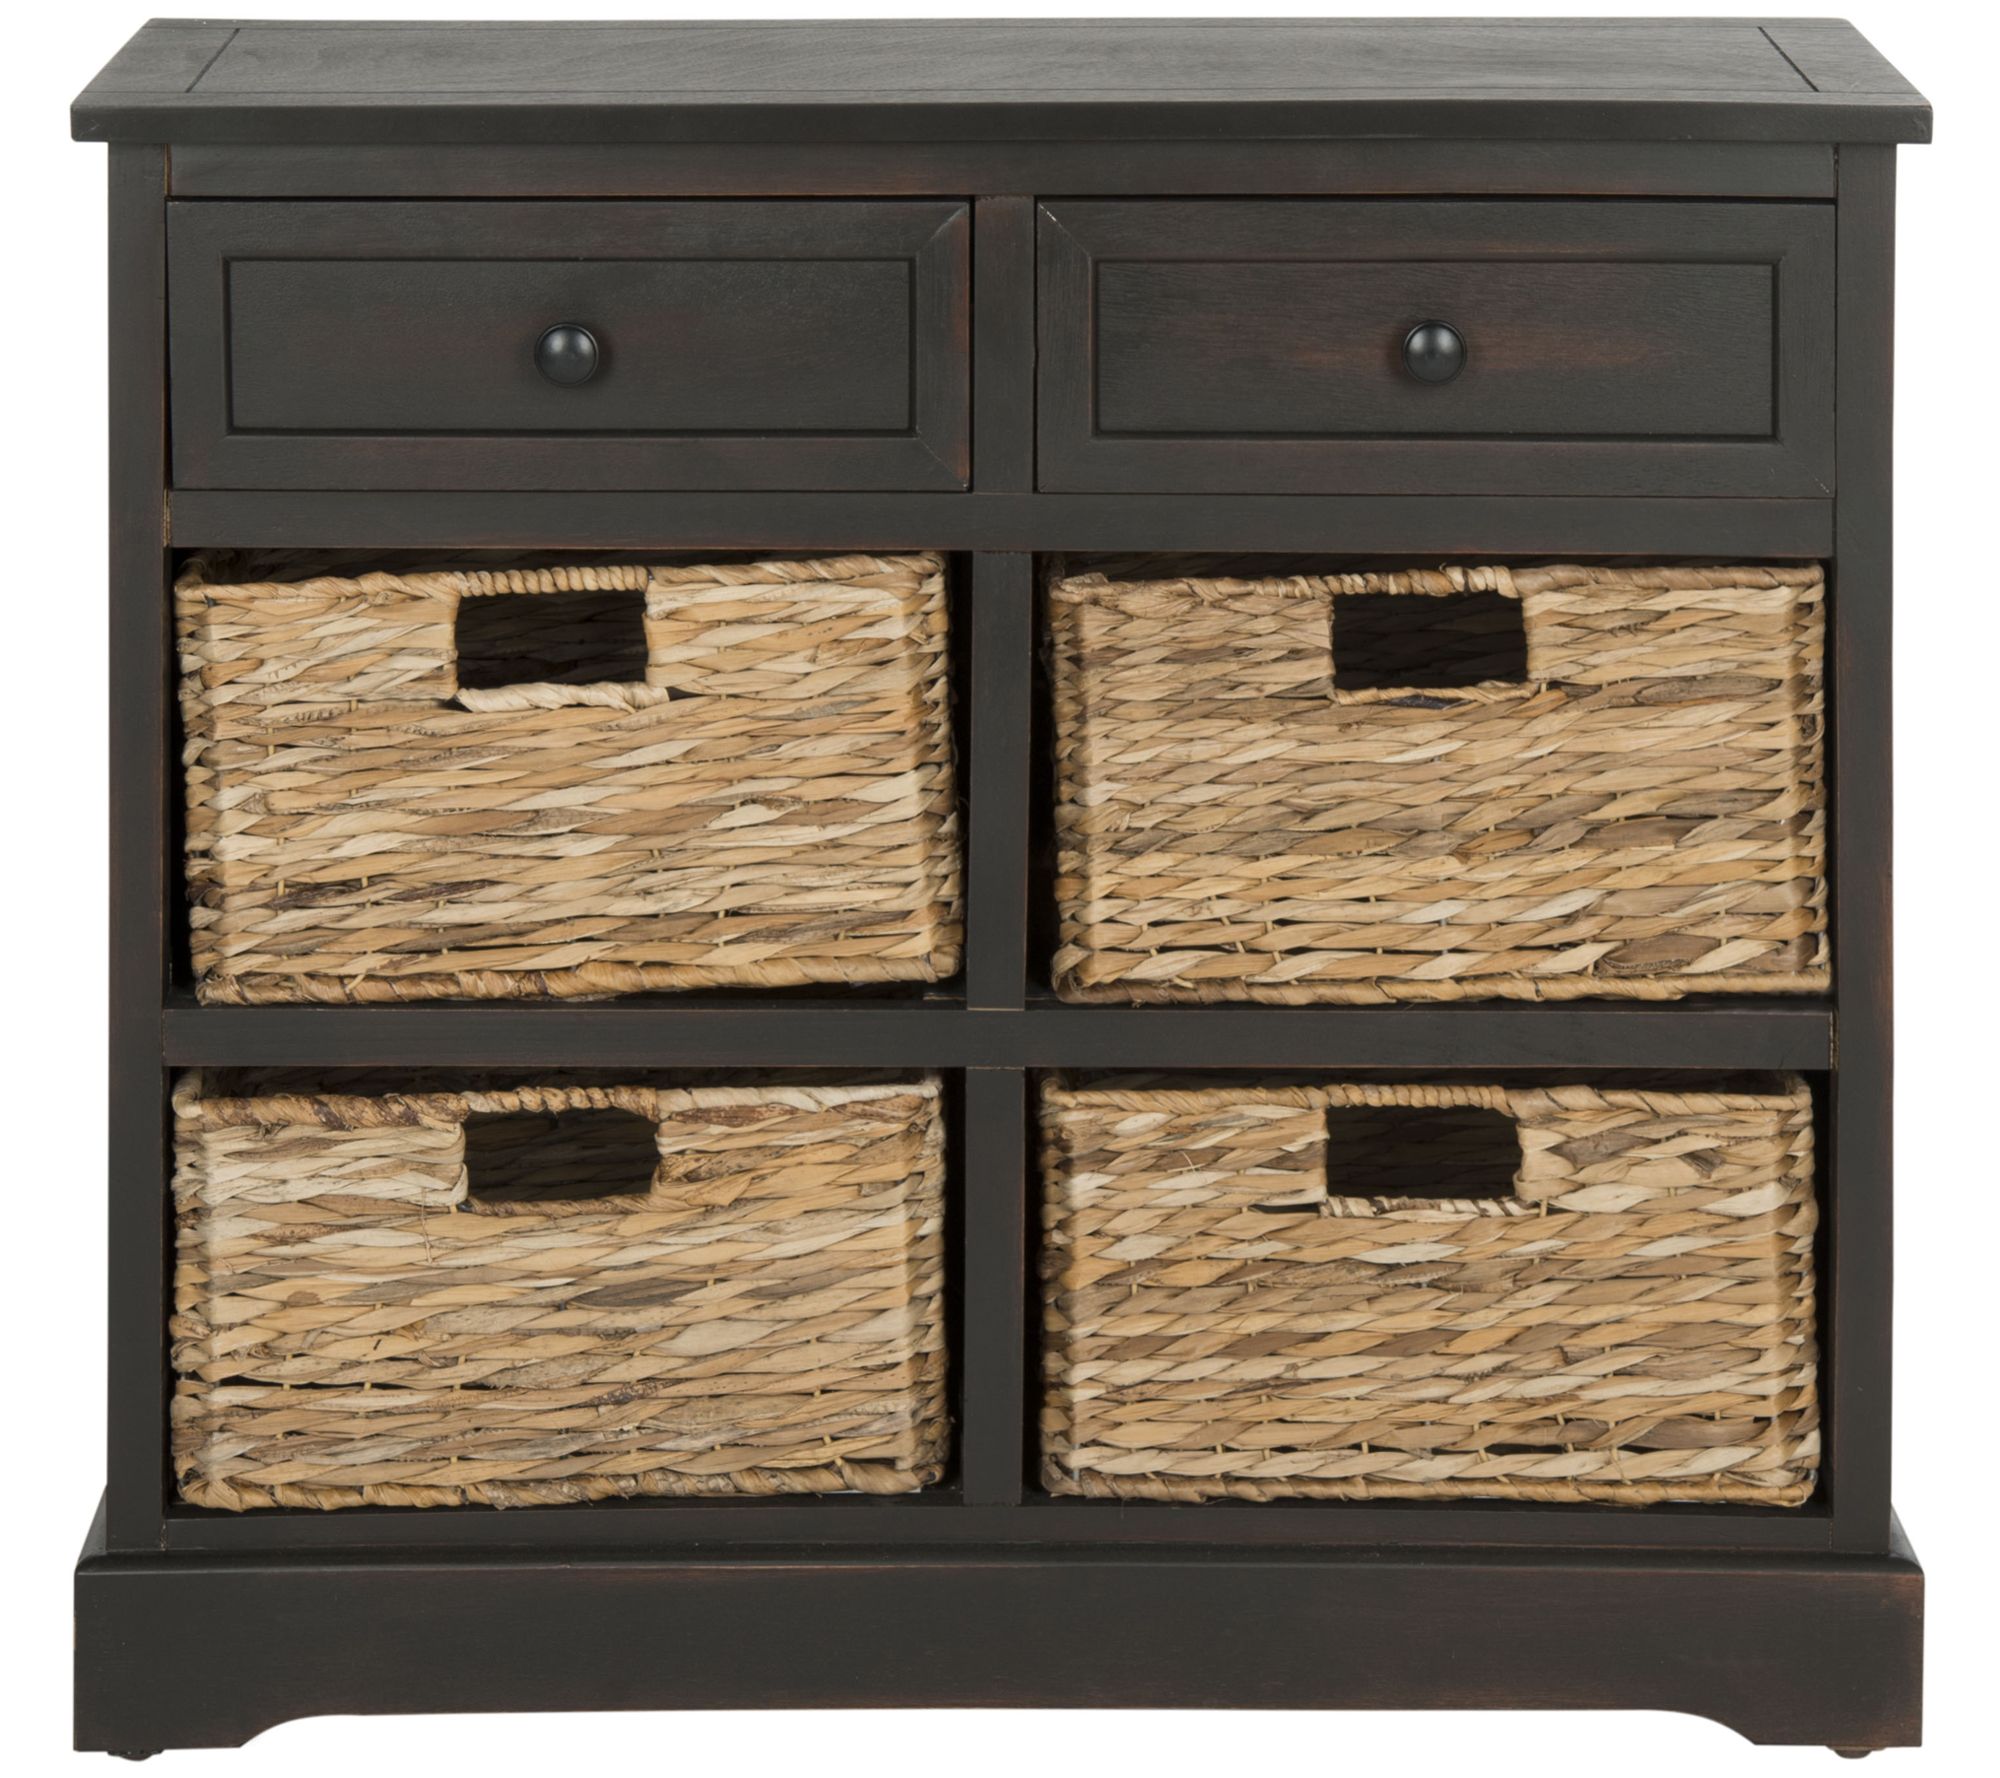 Distressed Black Keenan Storage Chest with Wicker Drawers